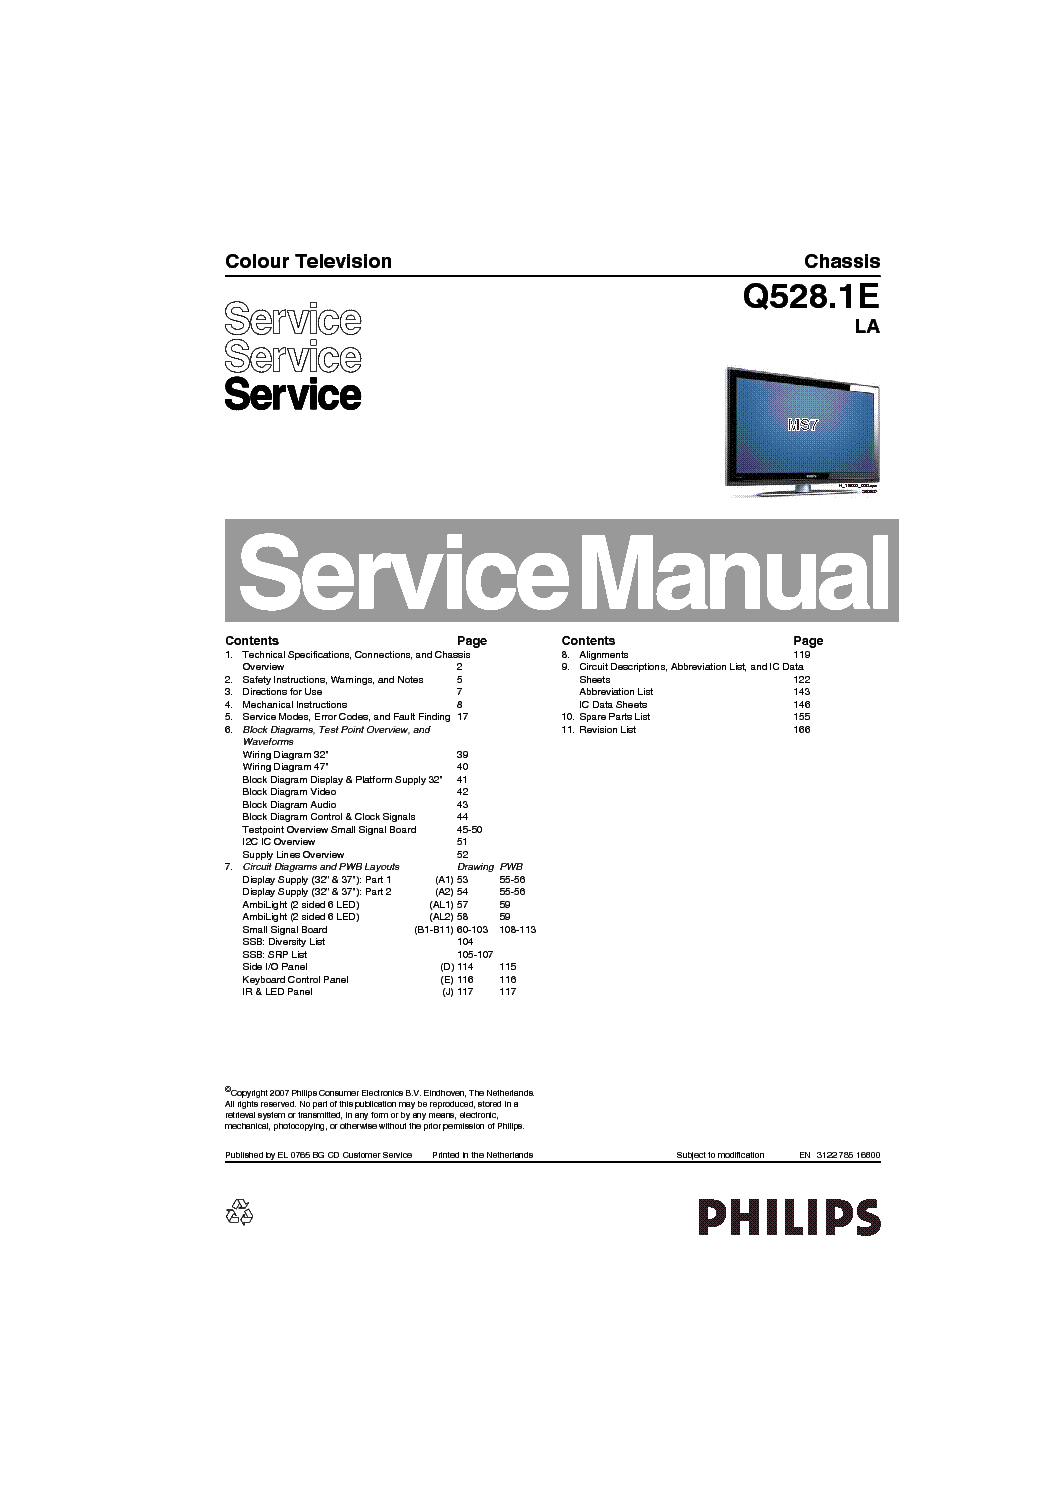 PHILIPS TV Q528.1ELA FULL SM service manual (1st page)